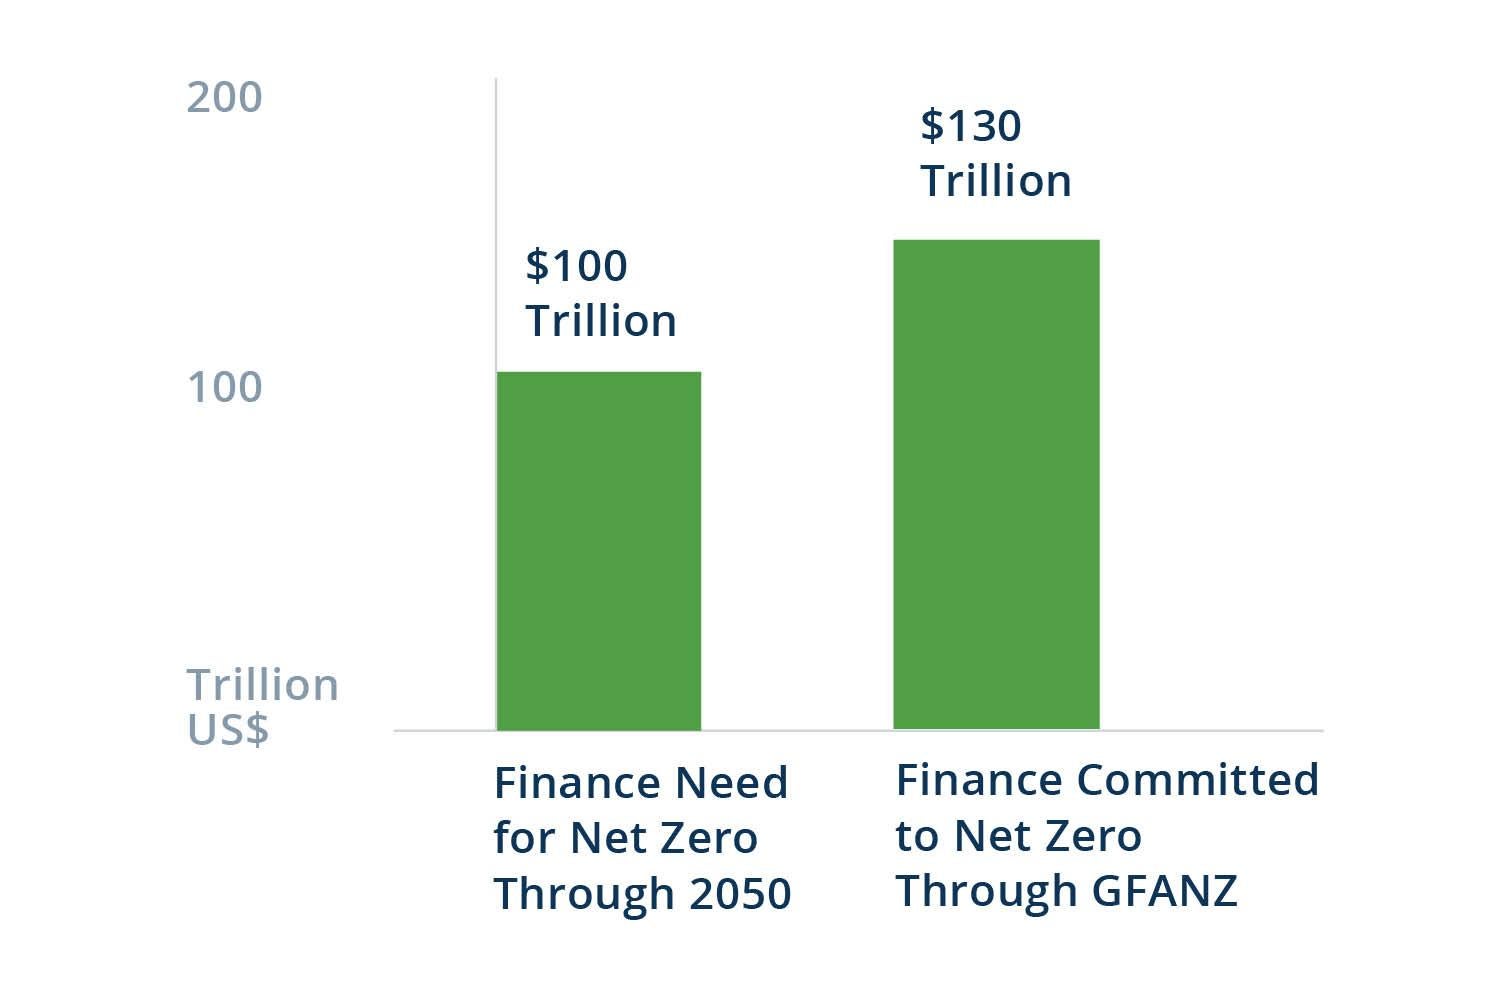 40% of the World's Financial Assets Are Pledged to Net Zero